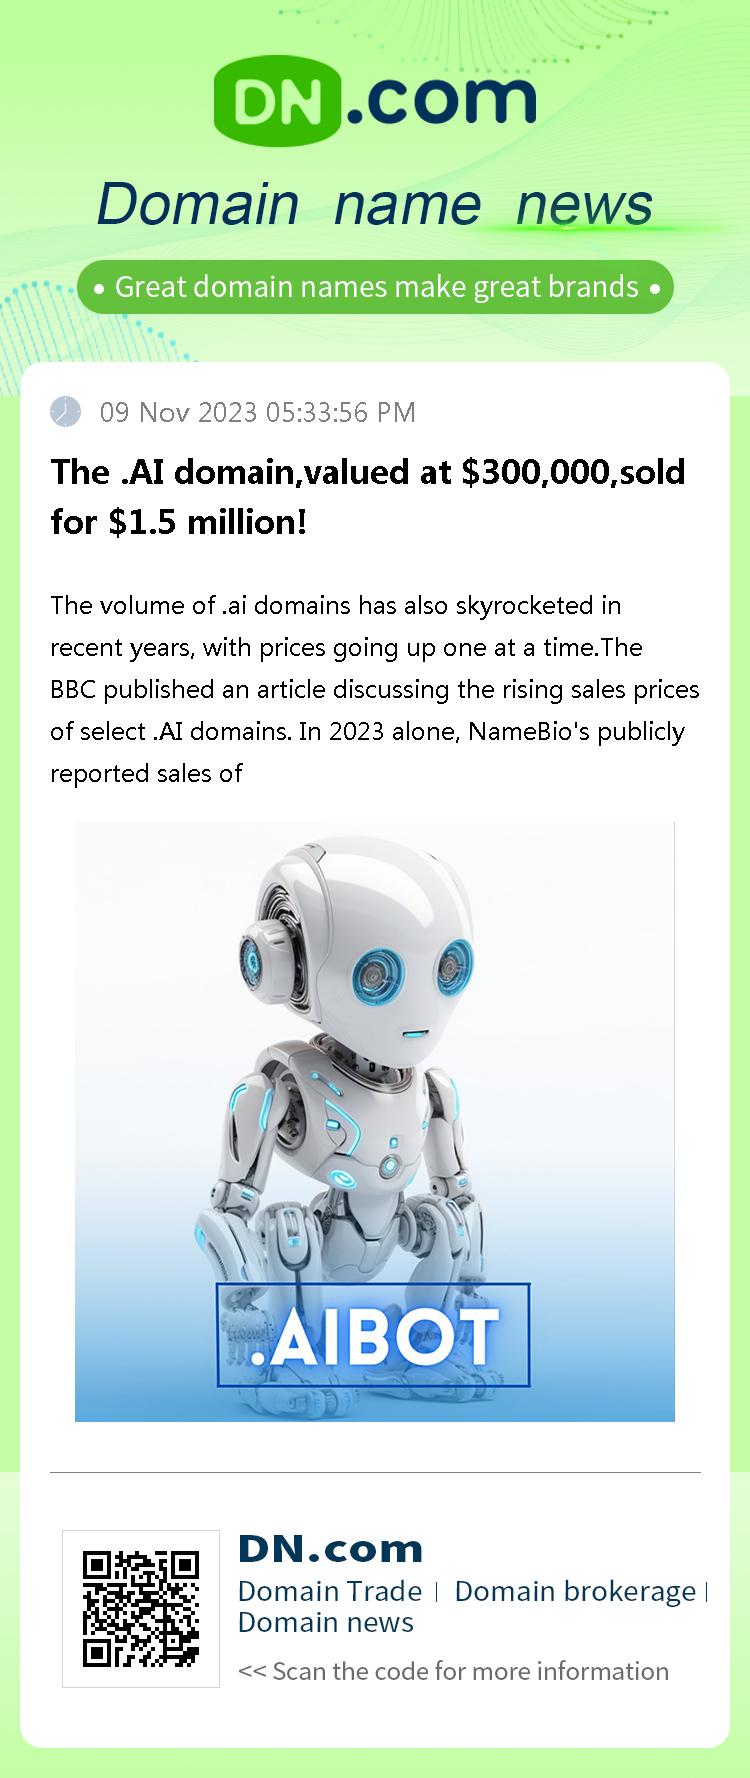 The .AI domain,valued at $300,000,sold for $1.5 million!